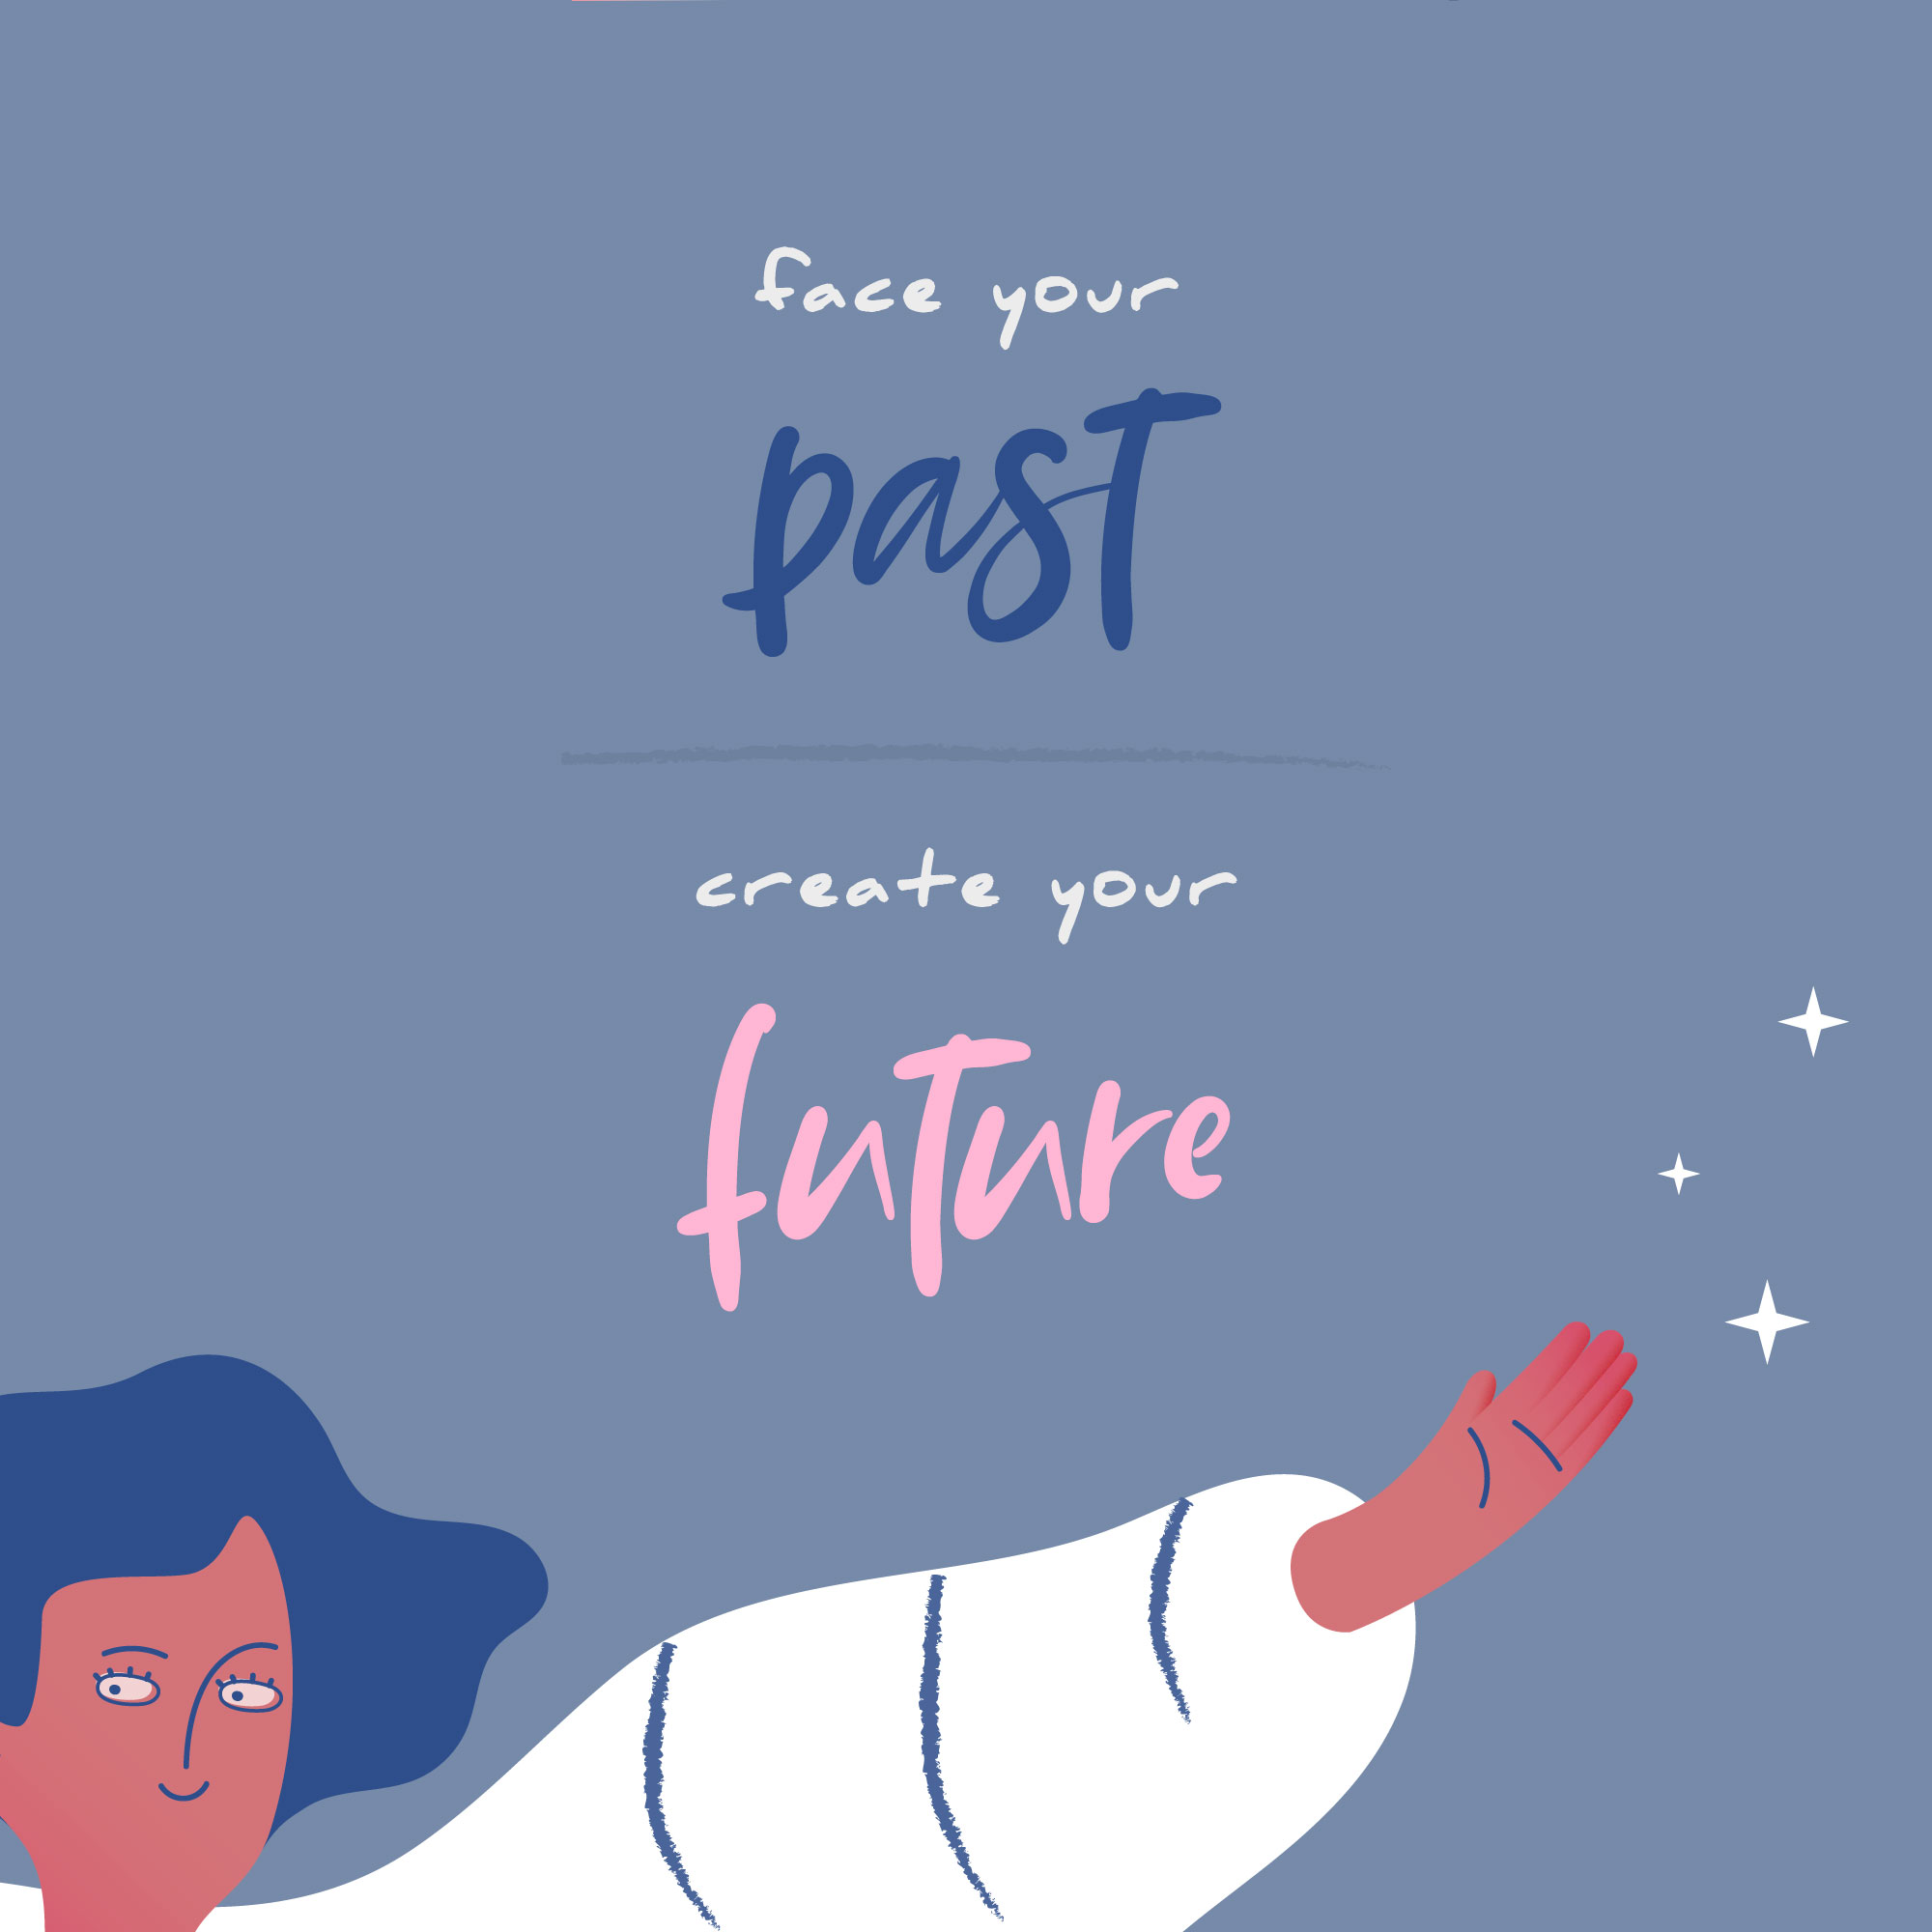 face your past, create your future